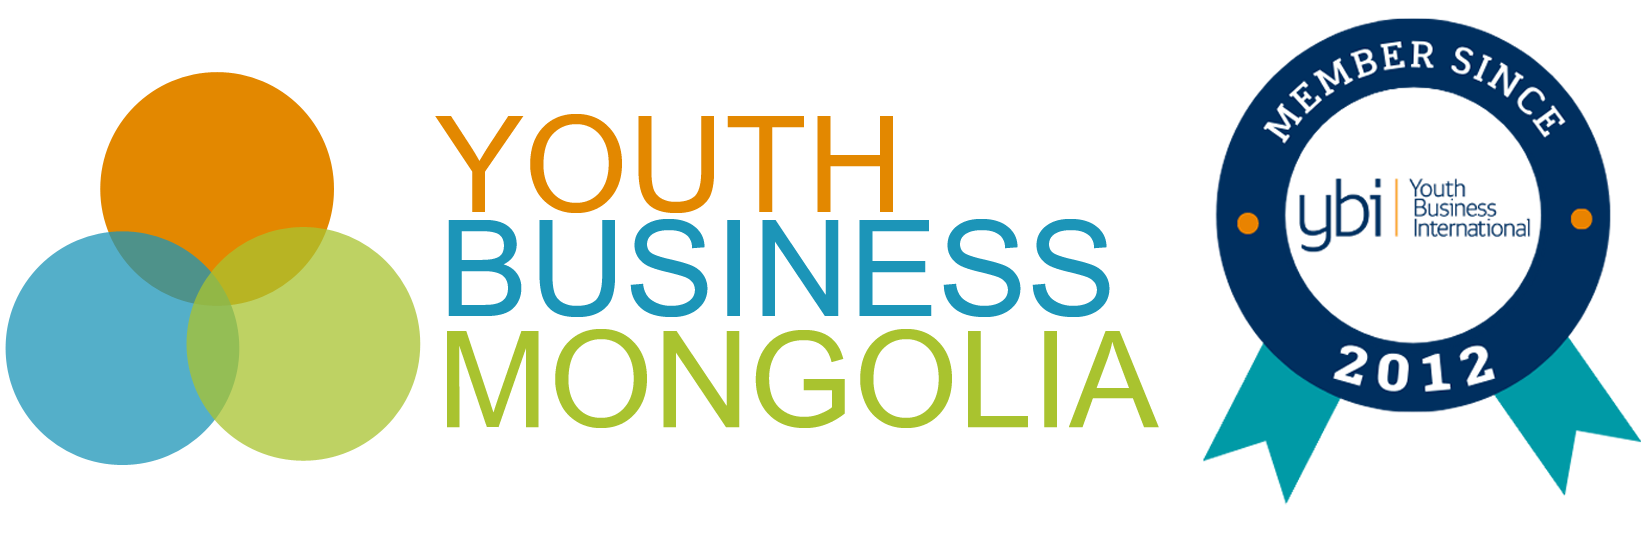 Youth Business Mongolia